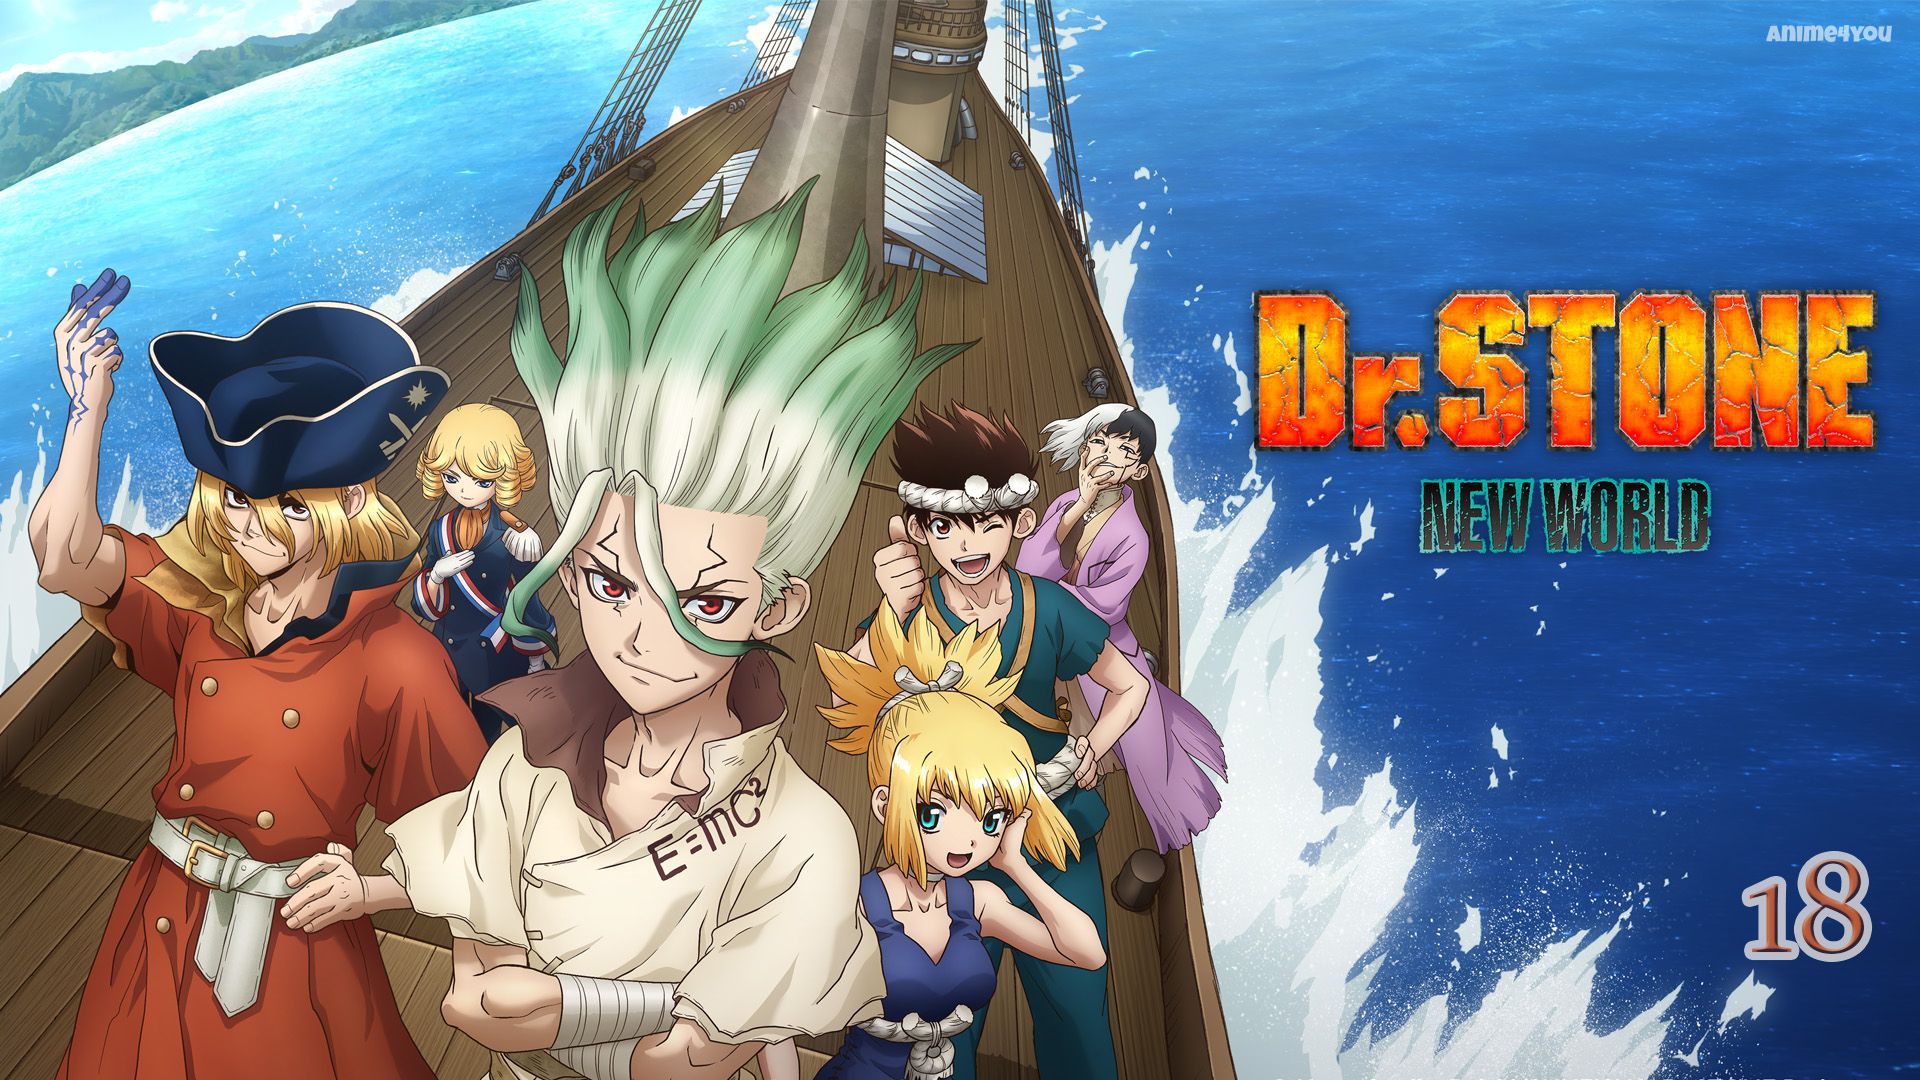 Dr Stone Season 3 Dub Release Date: When Will New World Part 2 Be